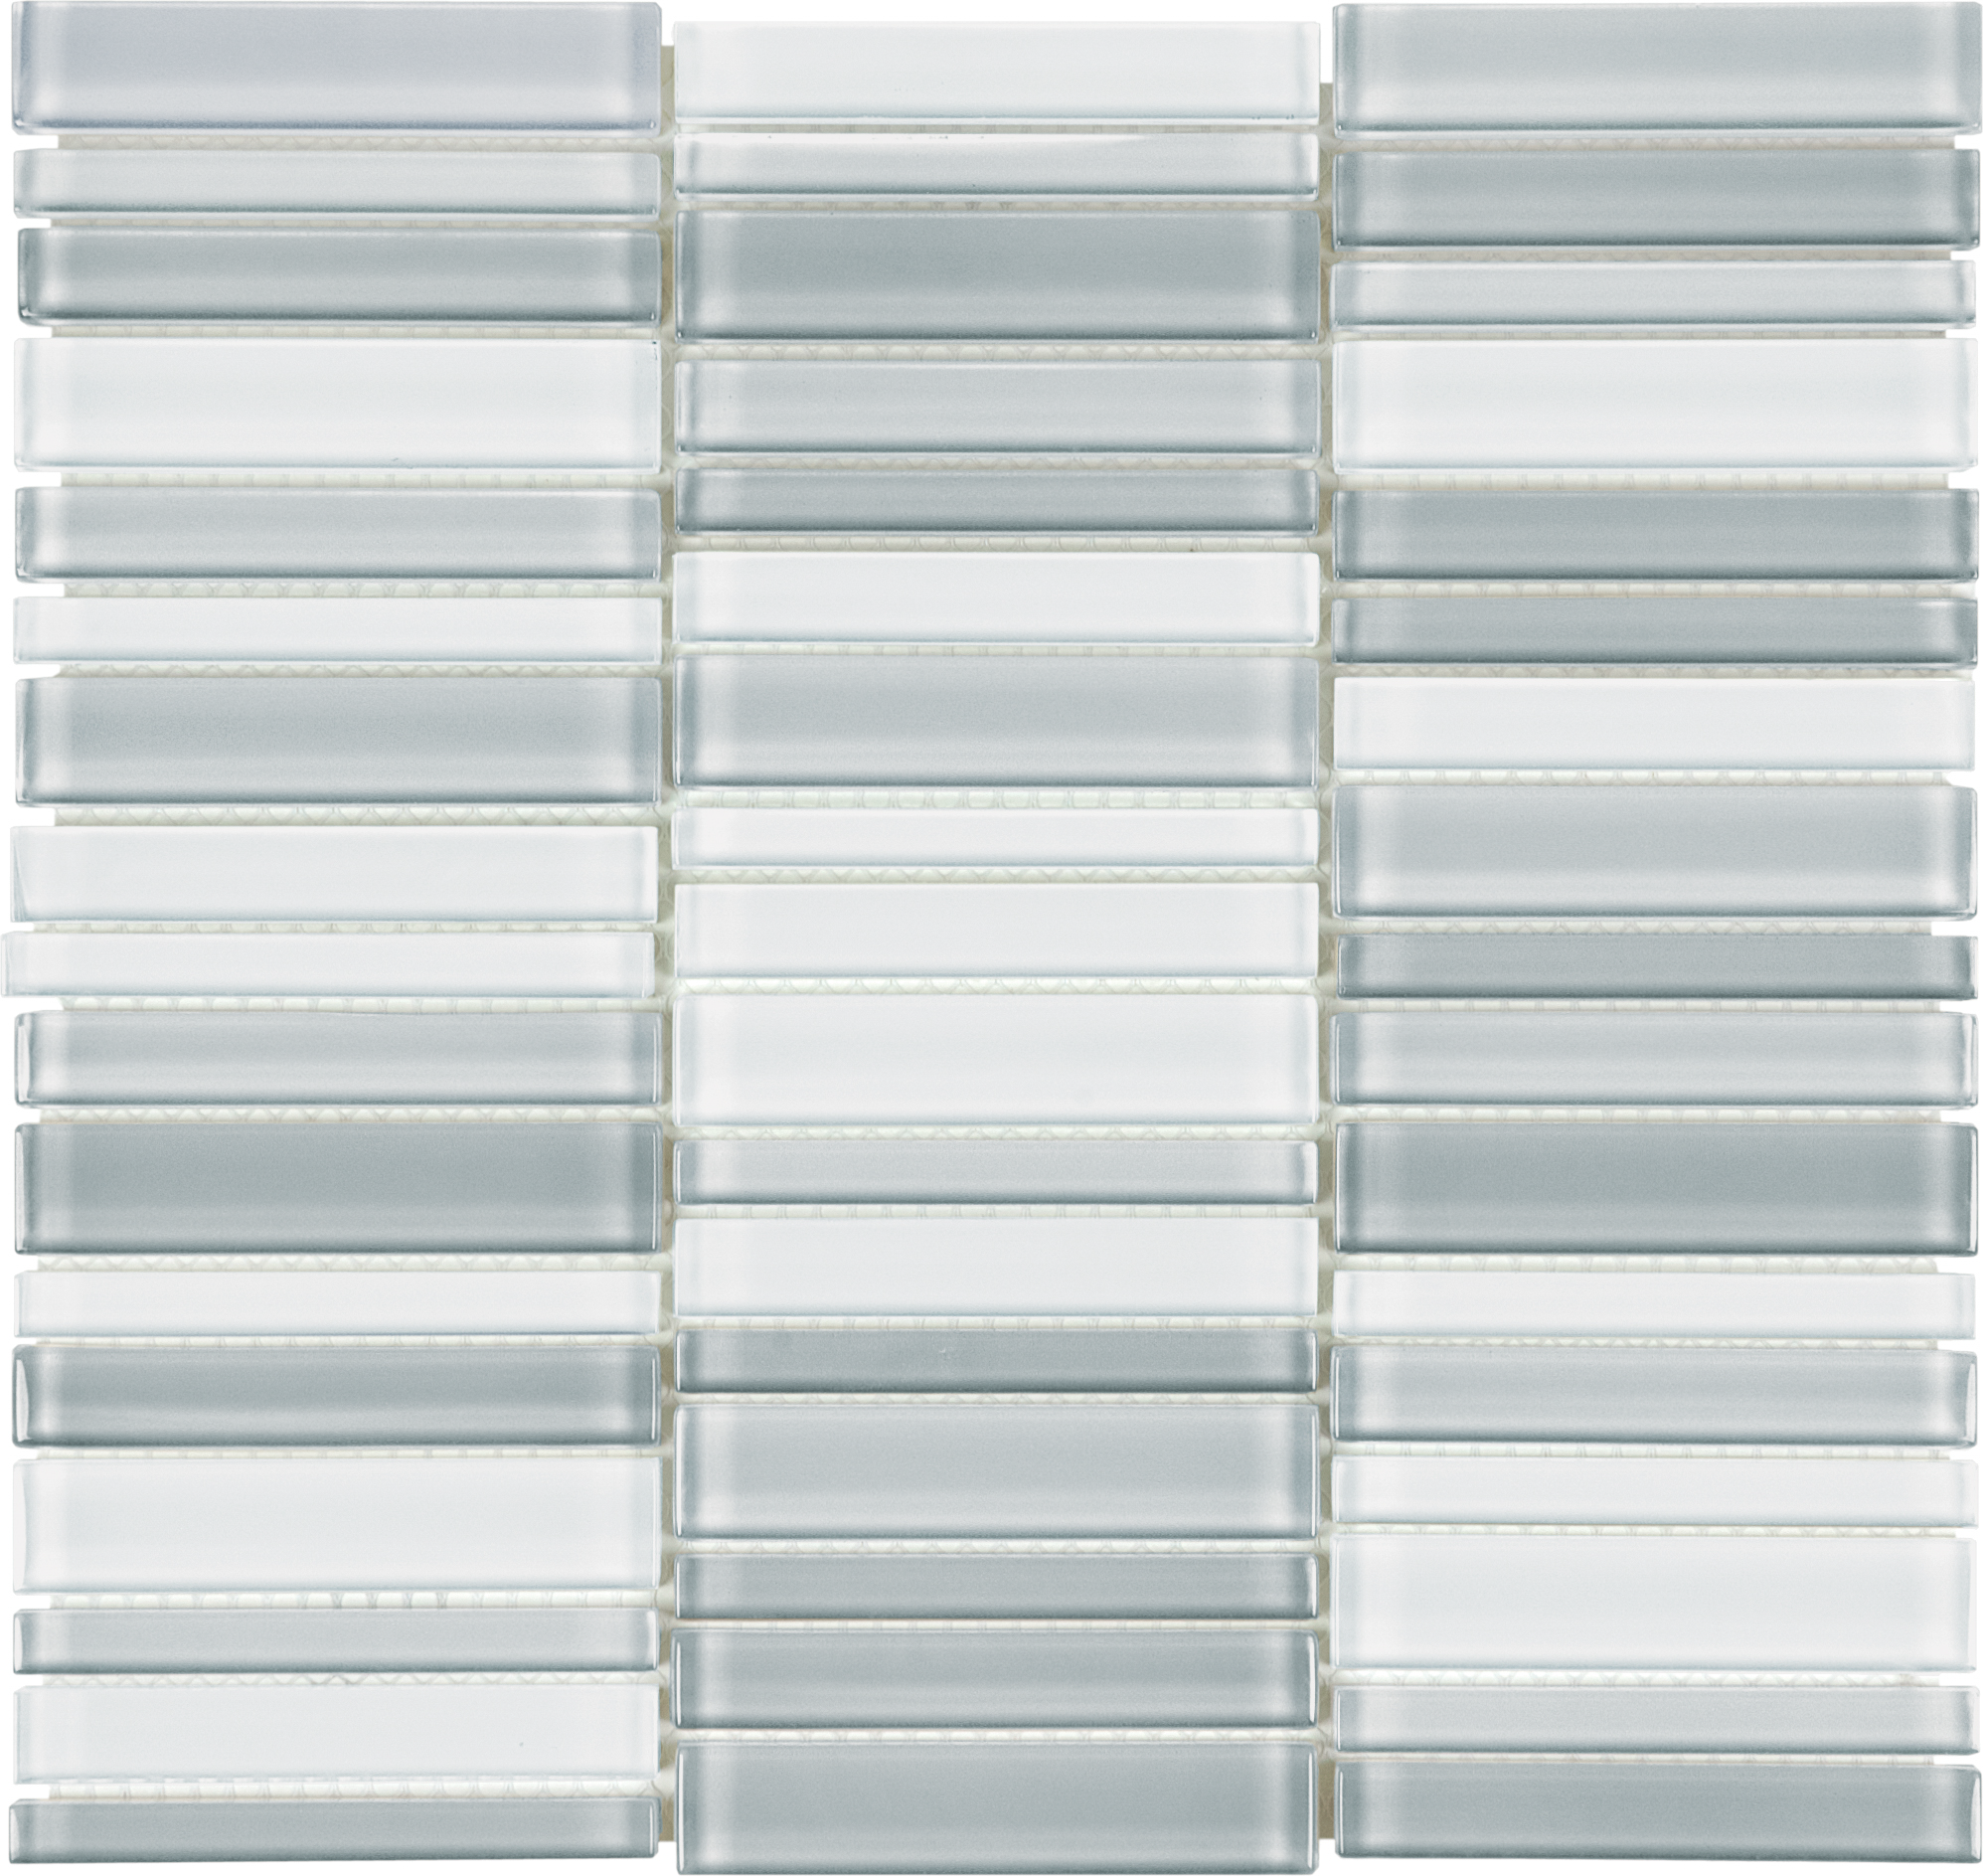 shades of grey random width stack pattern fused glass mosaic glass blend from element anatolia collection distributed by surface group international glossy finish rounded edge mesh shape